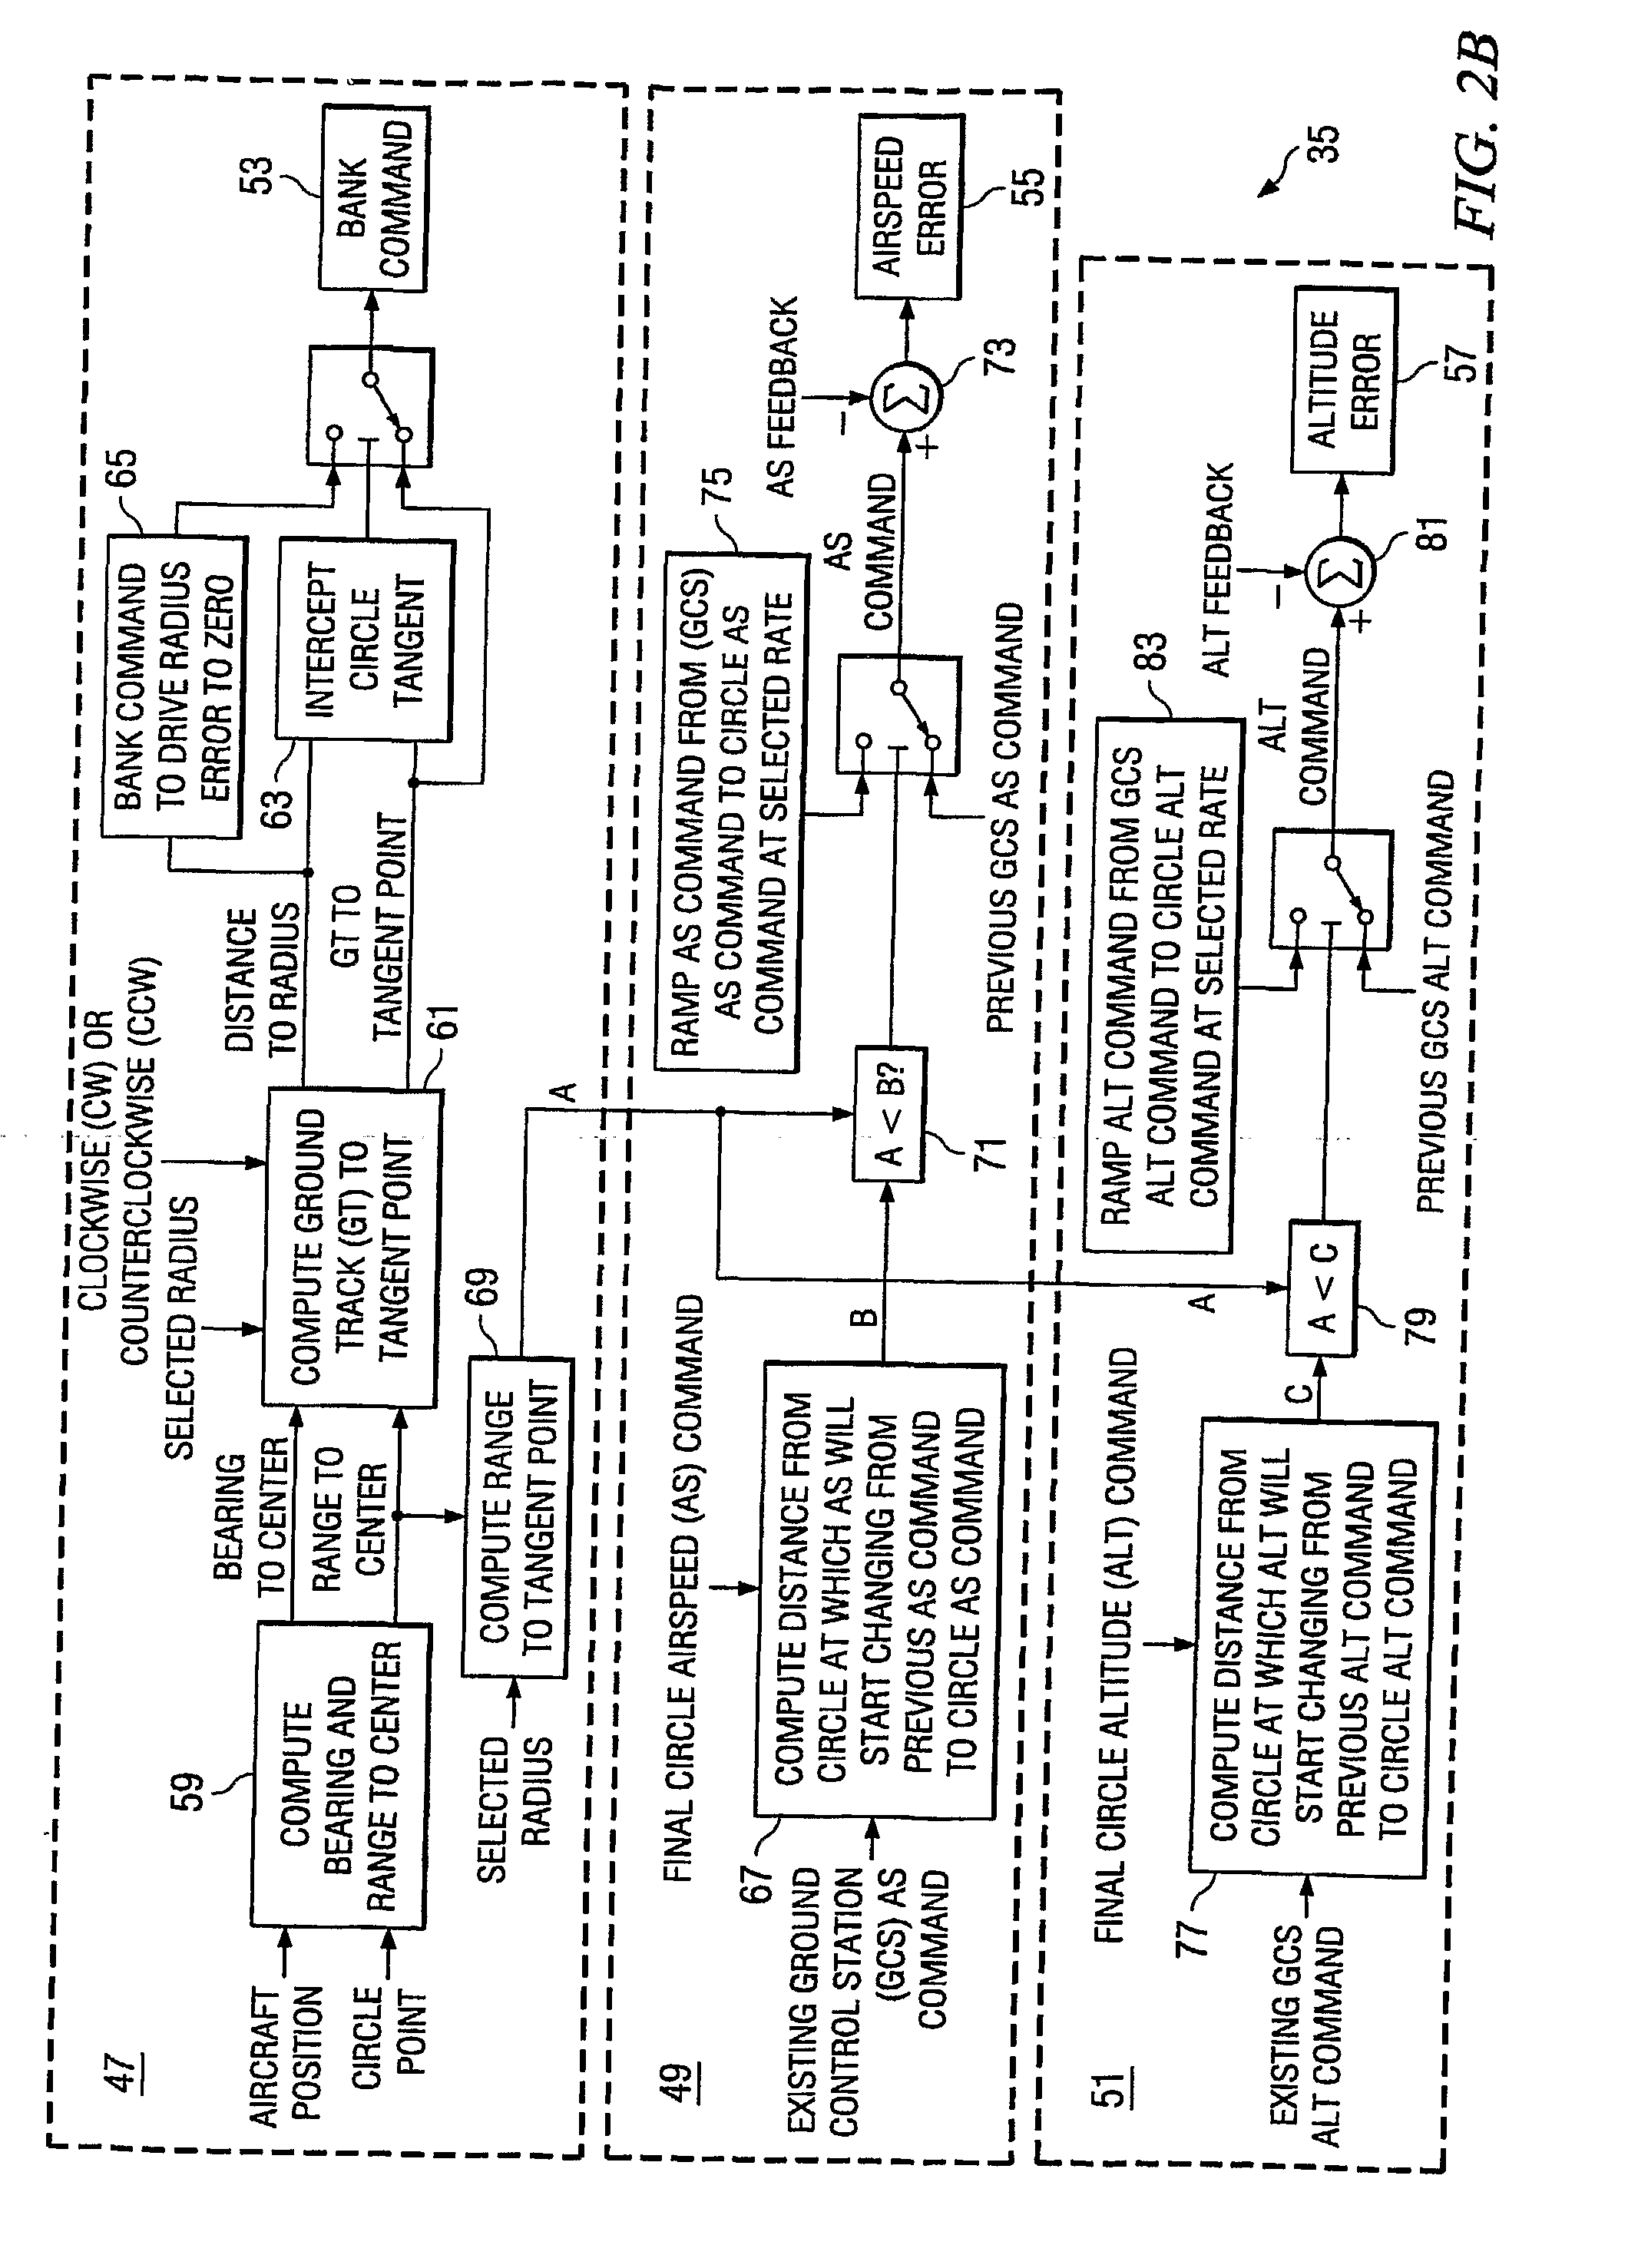 Control System for Automatic Circle Flight